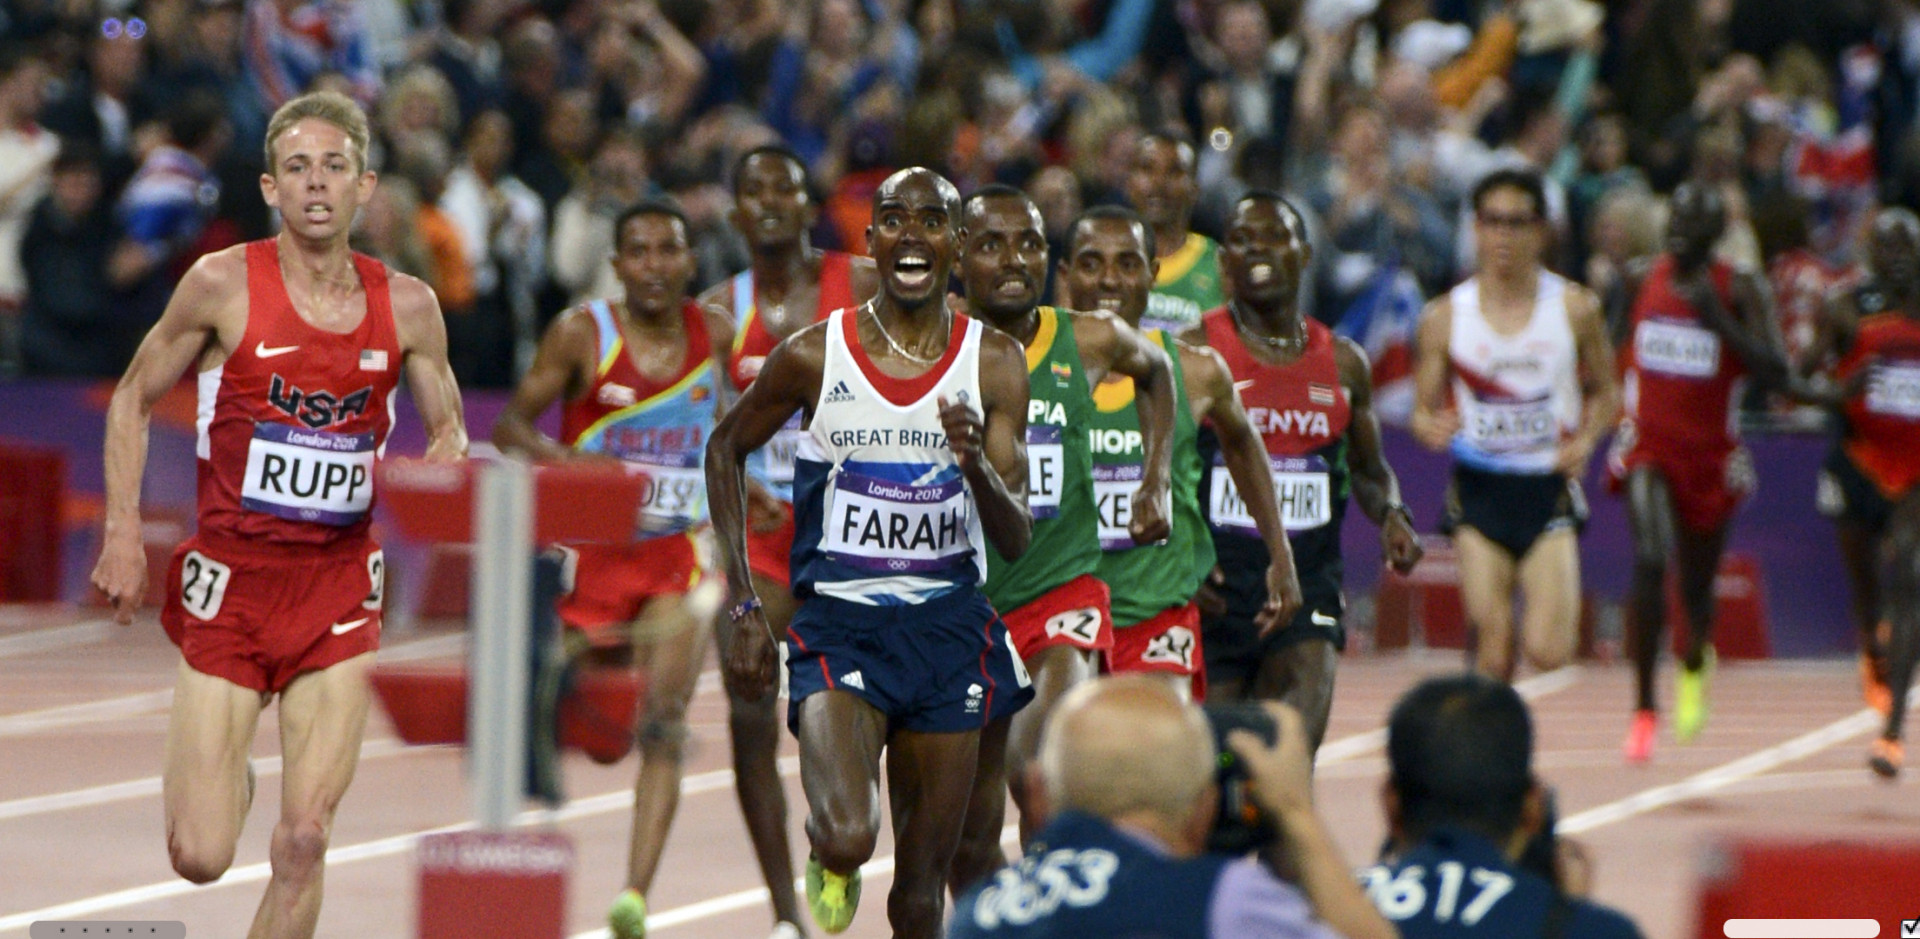 Mo Farah of Great Britain winning the 10,000 Meters : London Olympics : Photography by Adam Stoltman: Sports Photography, The Arts, Portraiture, Travel, Photojournalism and Fine Art in New York